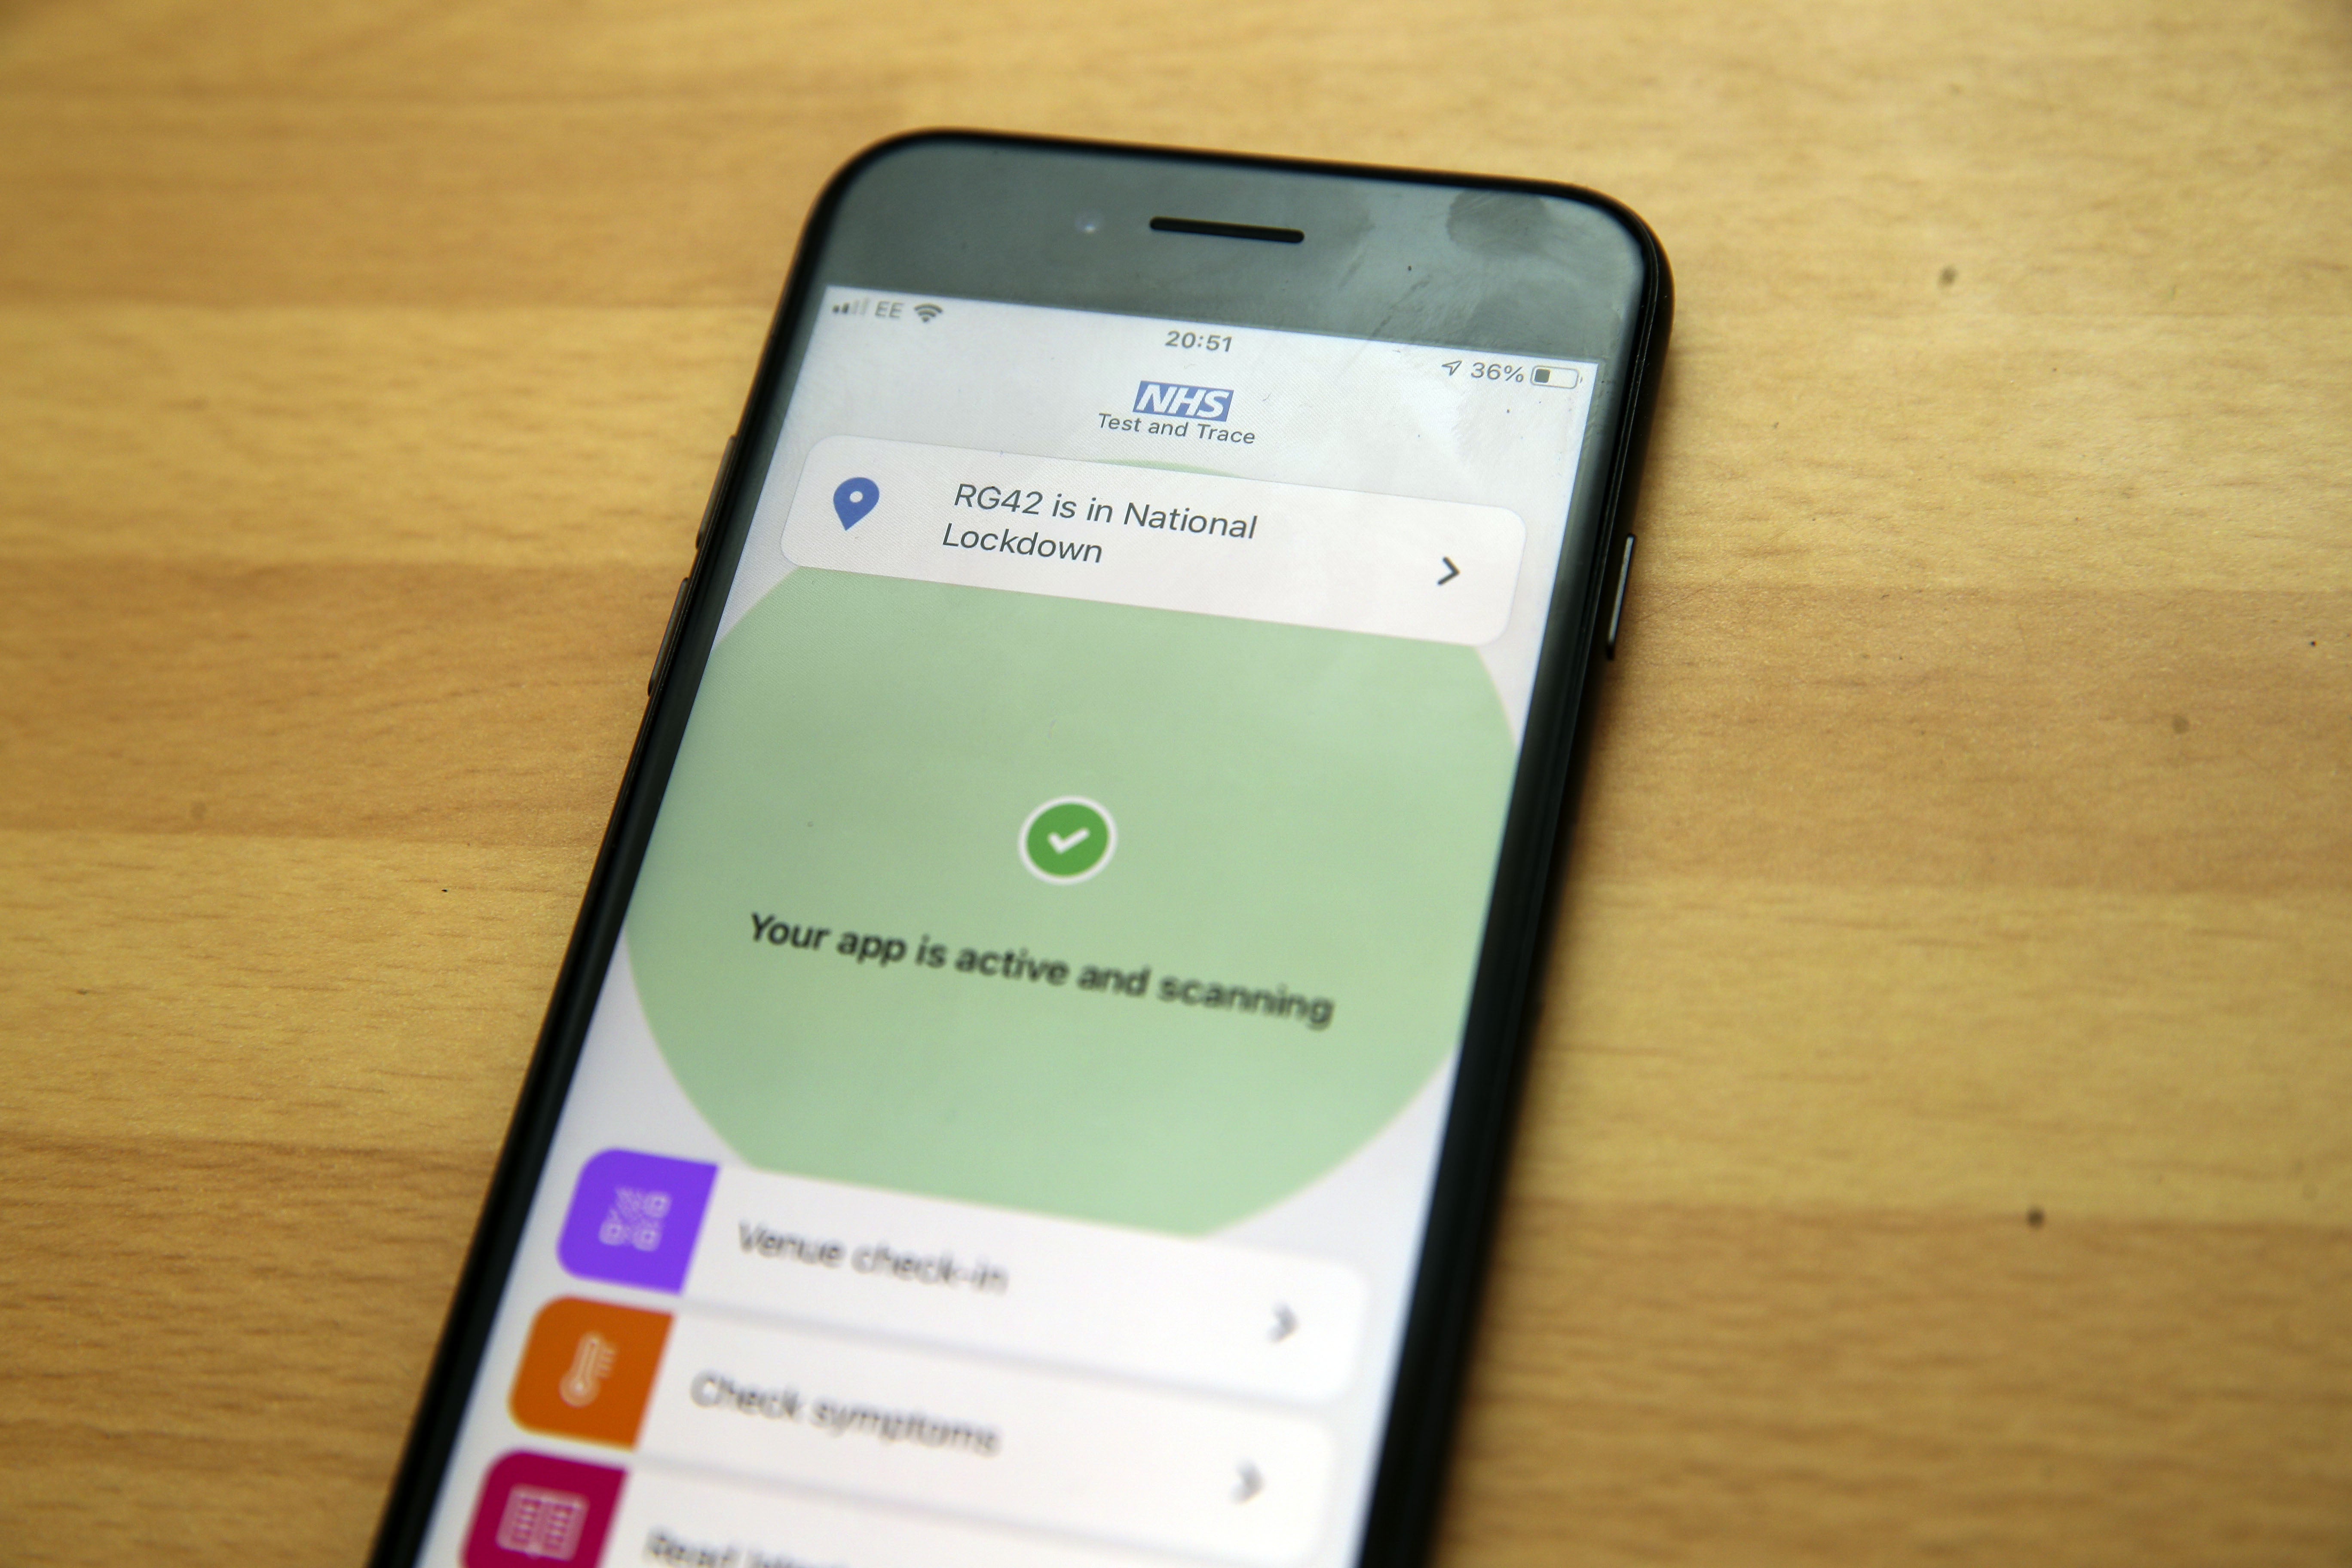 The NHS app on a smartphone